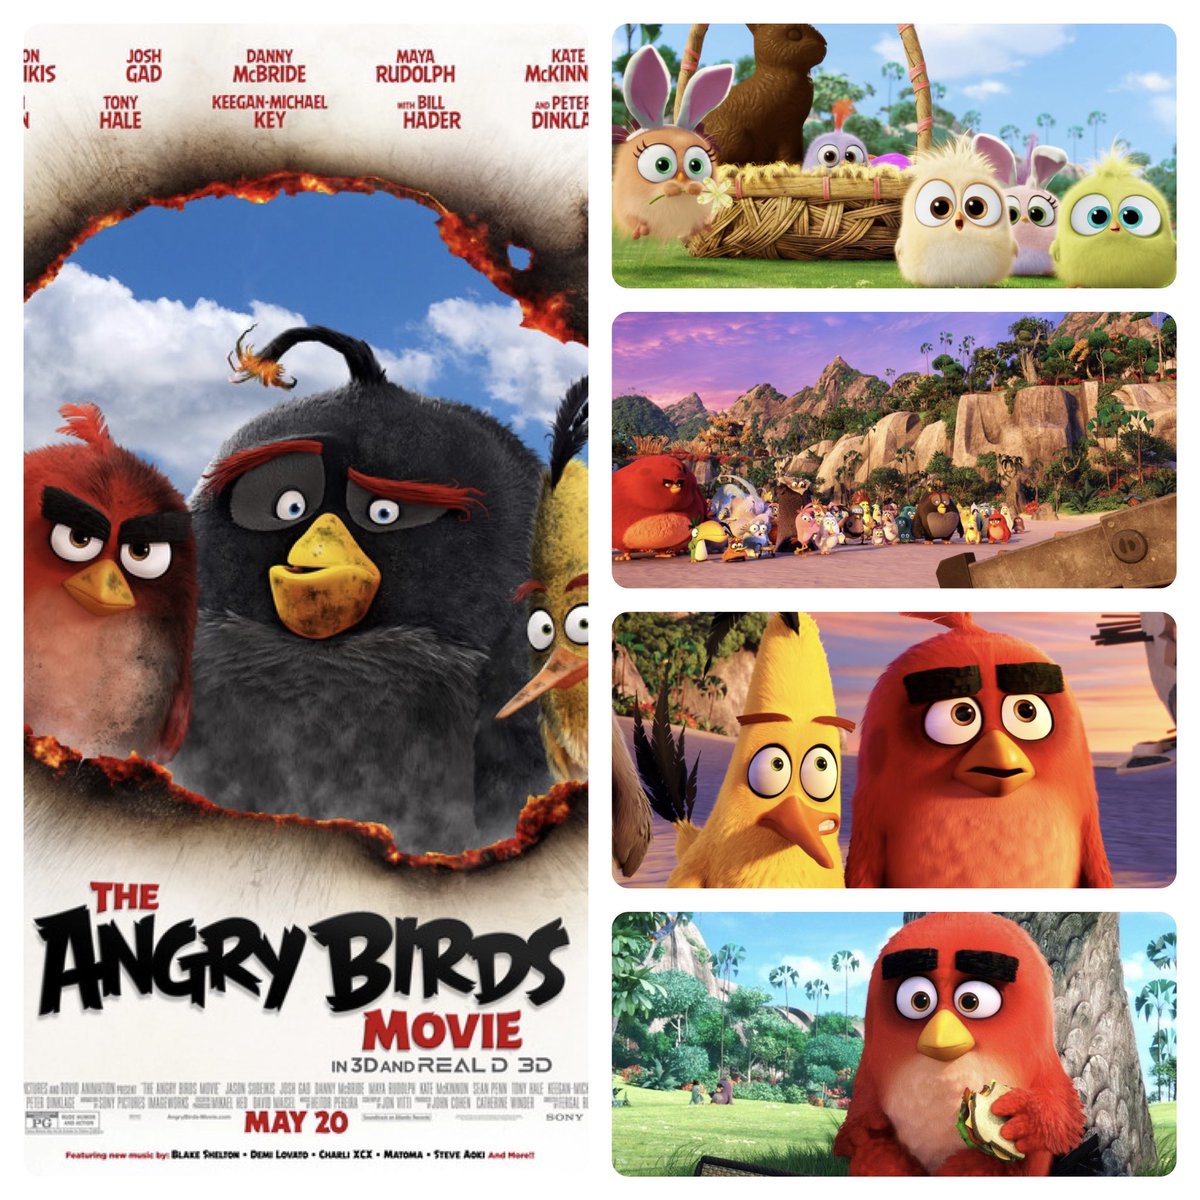 The Angry Birds Movie celebrates 7th anniversary today.
#angrybird #angrybirds #angrybirdsmovie #theangrybirdsmovie #sonypicturesreleasing #sonypictures #sonypicturesstudios #sonypicturesentertainment #sonystudios #columbiapictures #rovioanimation